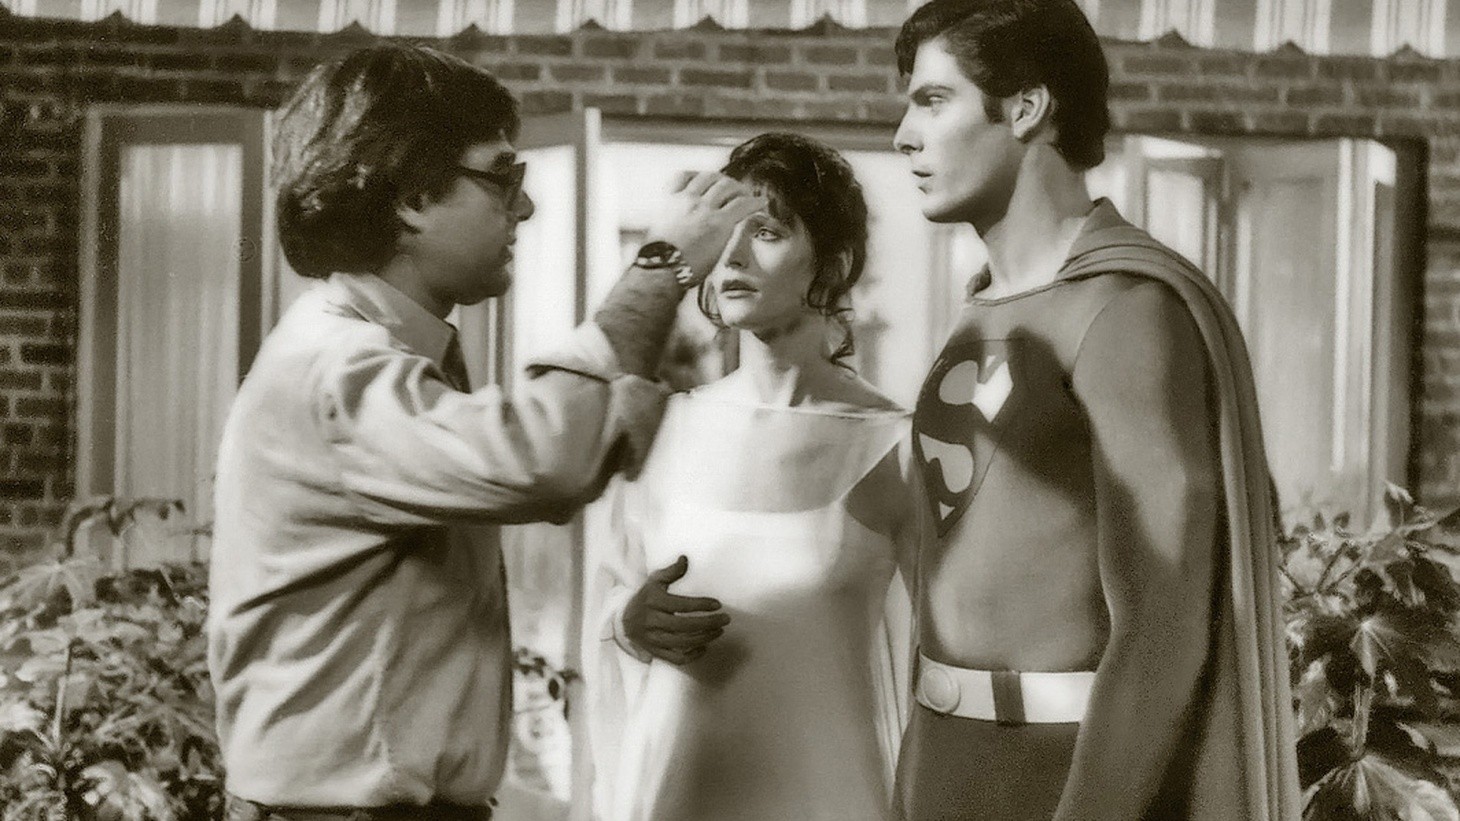 Richard Donner and Christopher Reeve on the set of Superman